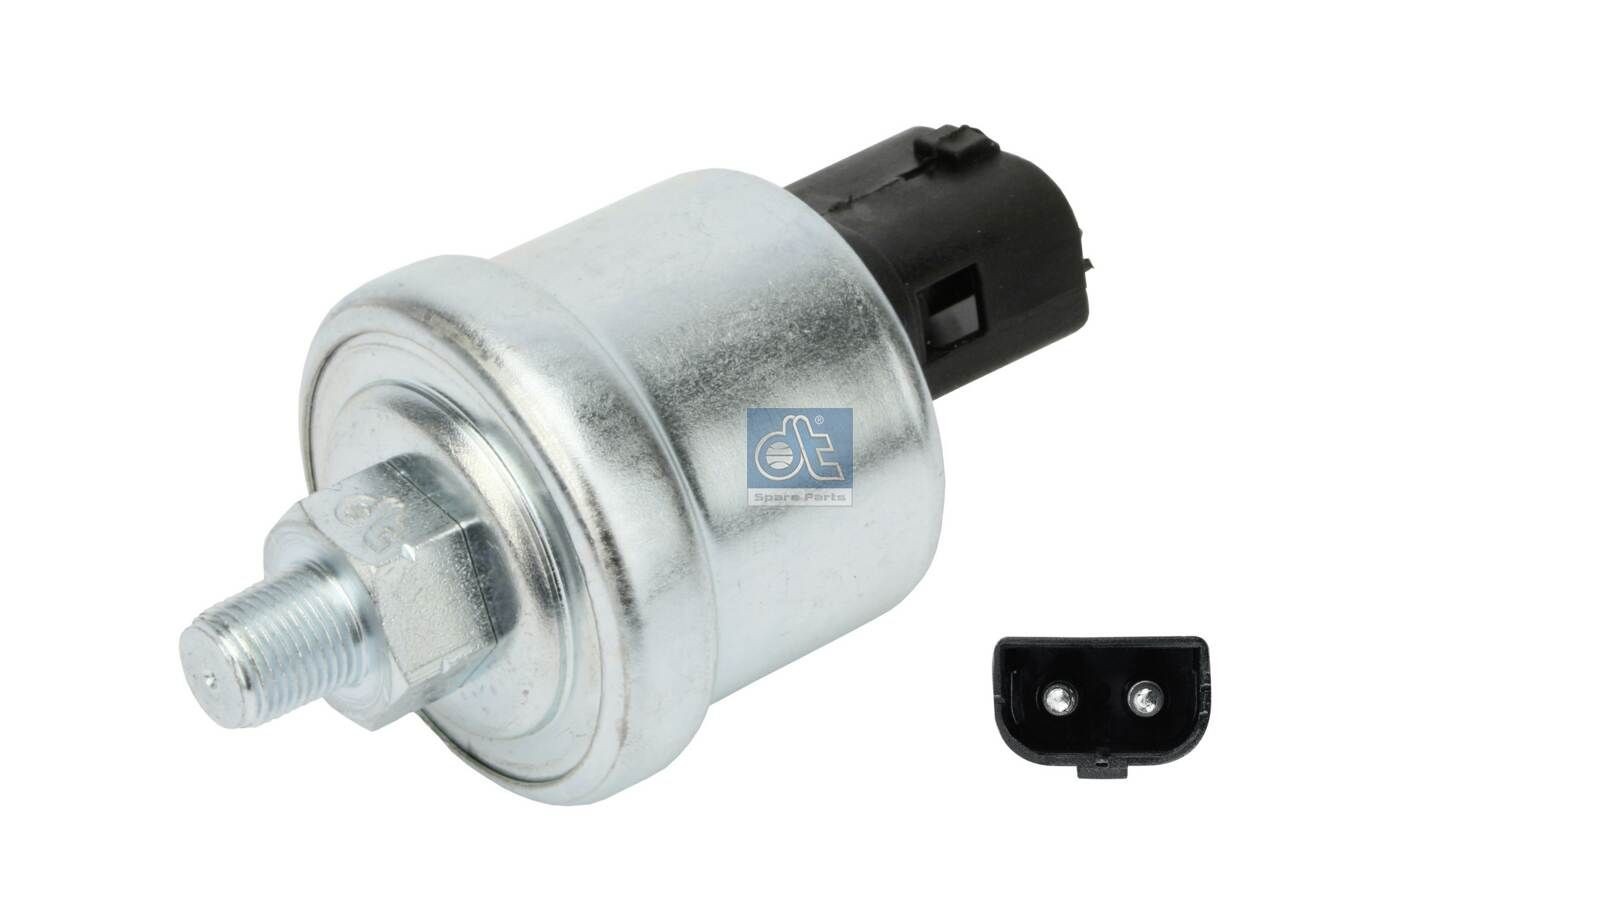 Oil pressure switch DT Spare Parts 1/8'' x 27 NPTF, 7 bar - 2.23035